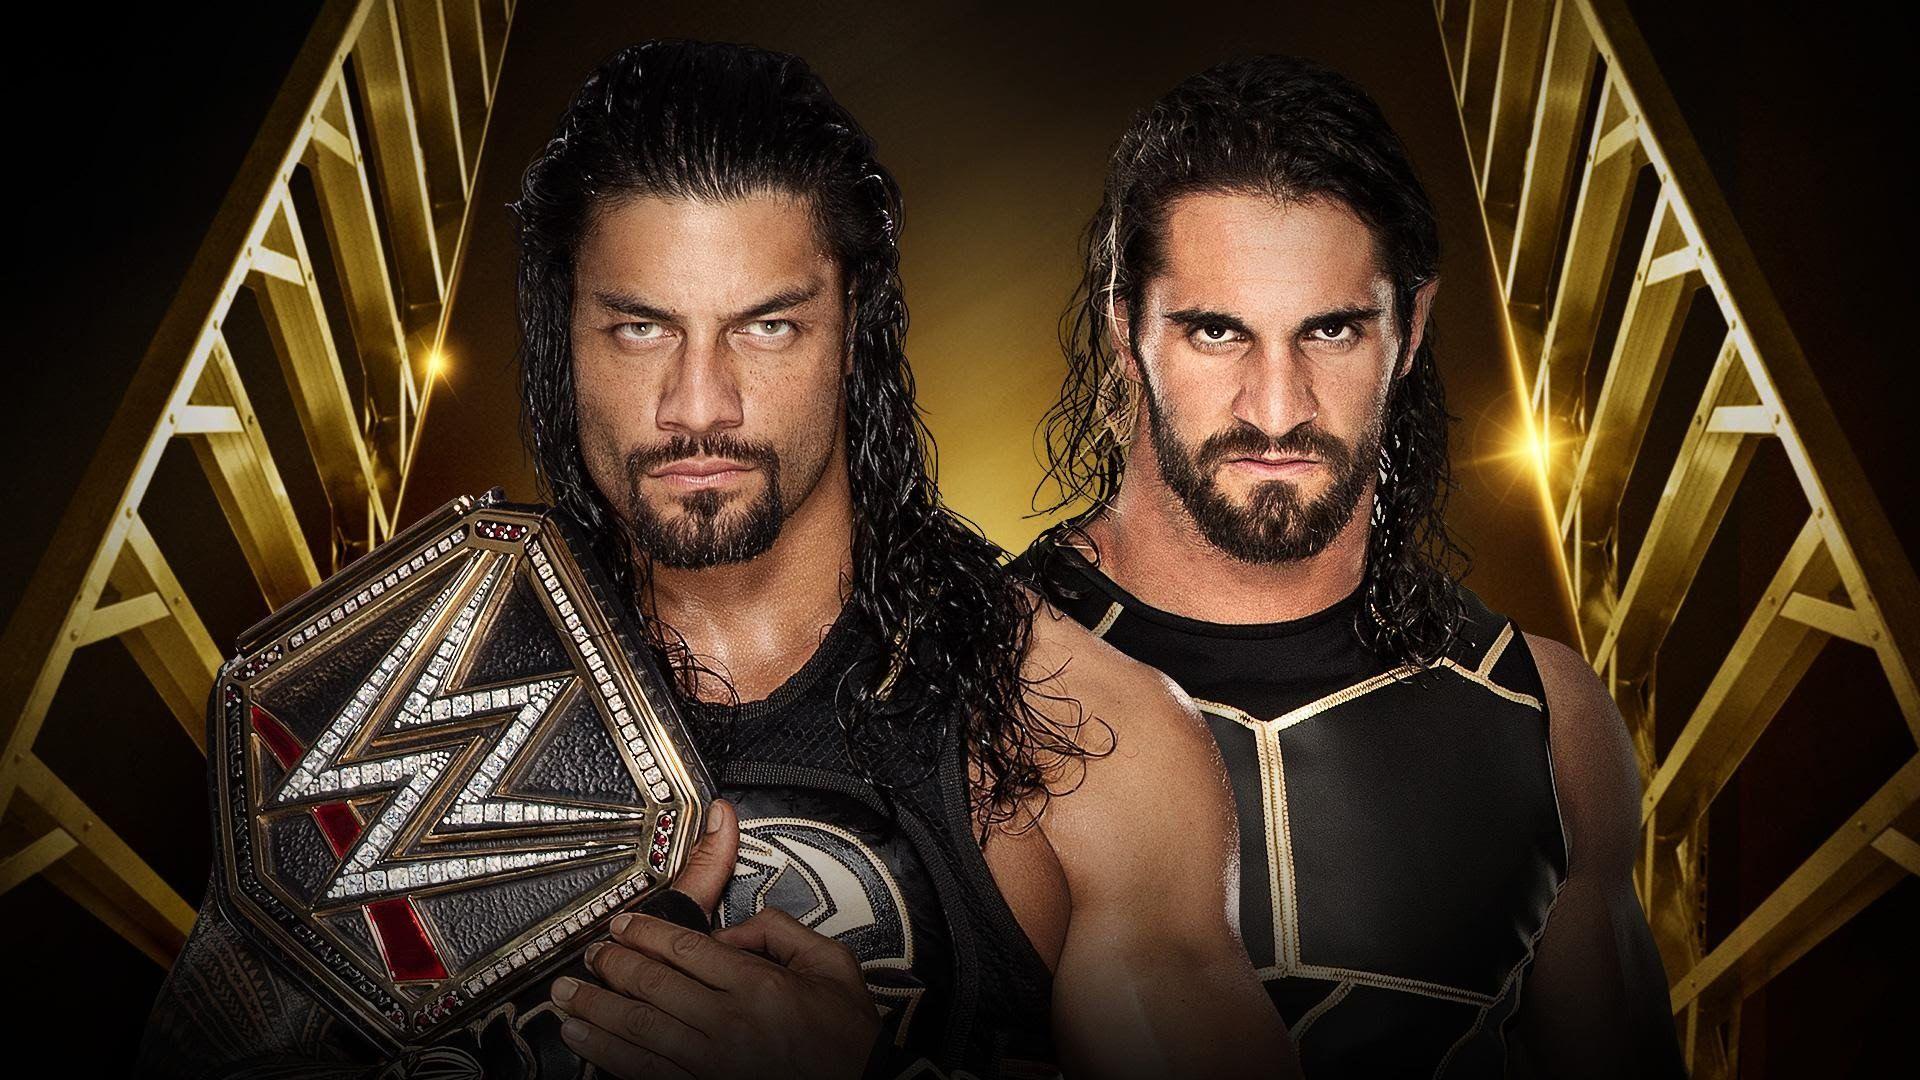 WWE MONEY IN THE BANK 2016 Reigns vs Seth Rollins